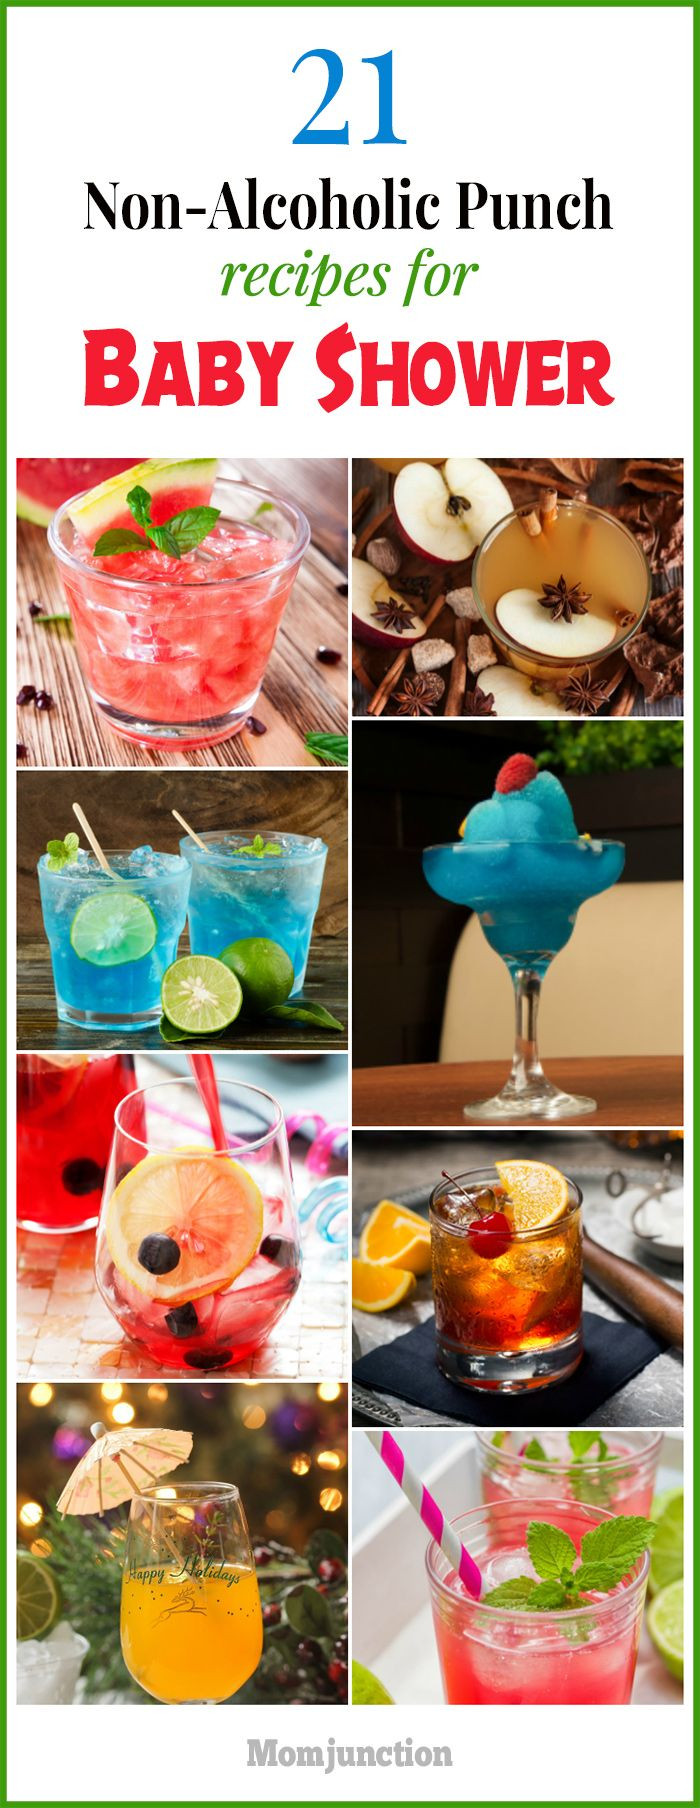 Non Alcoholic Punch Recipes Baby Shower
 97 best Baby Shower Ideas images on Pinterest